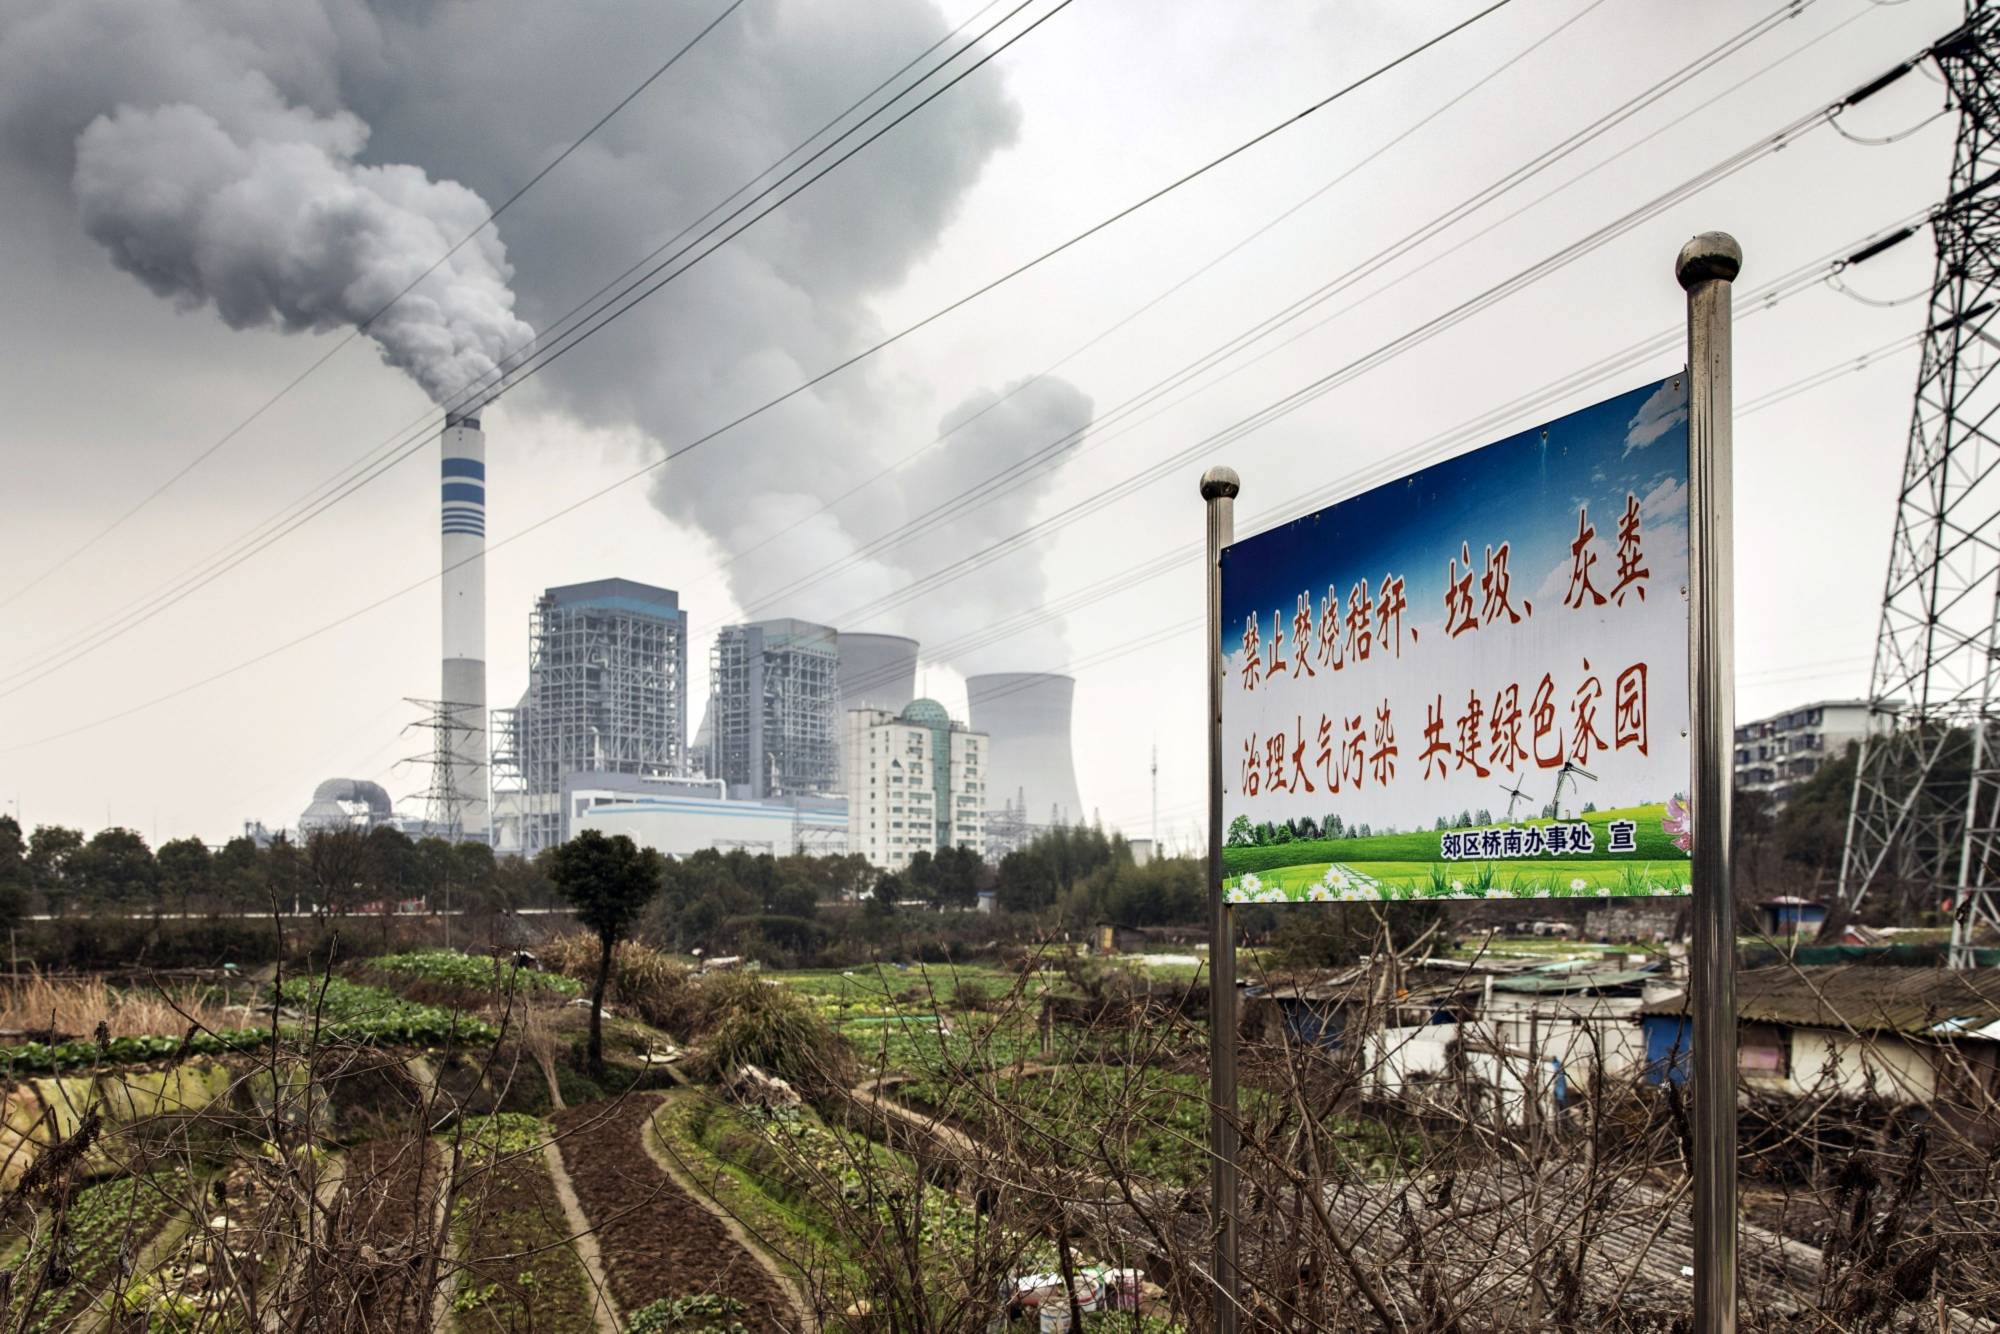 Cooling towers at a coal-fired power station in Tongling, Anhui province, China, in January 2019 | BLOOMBERG